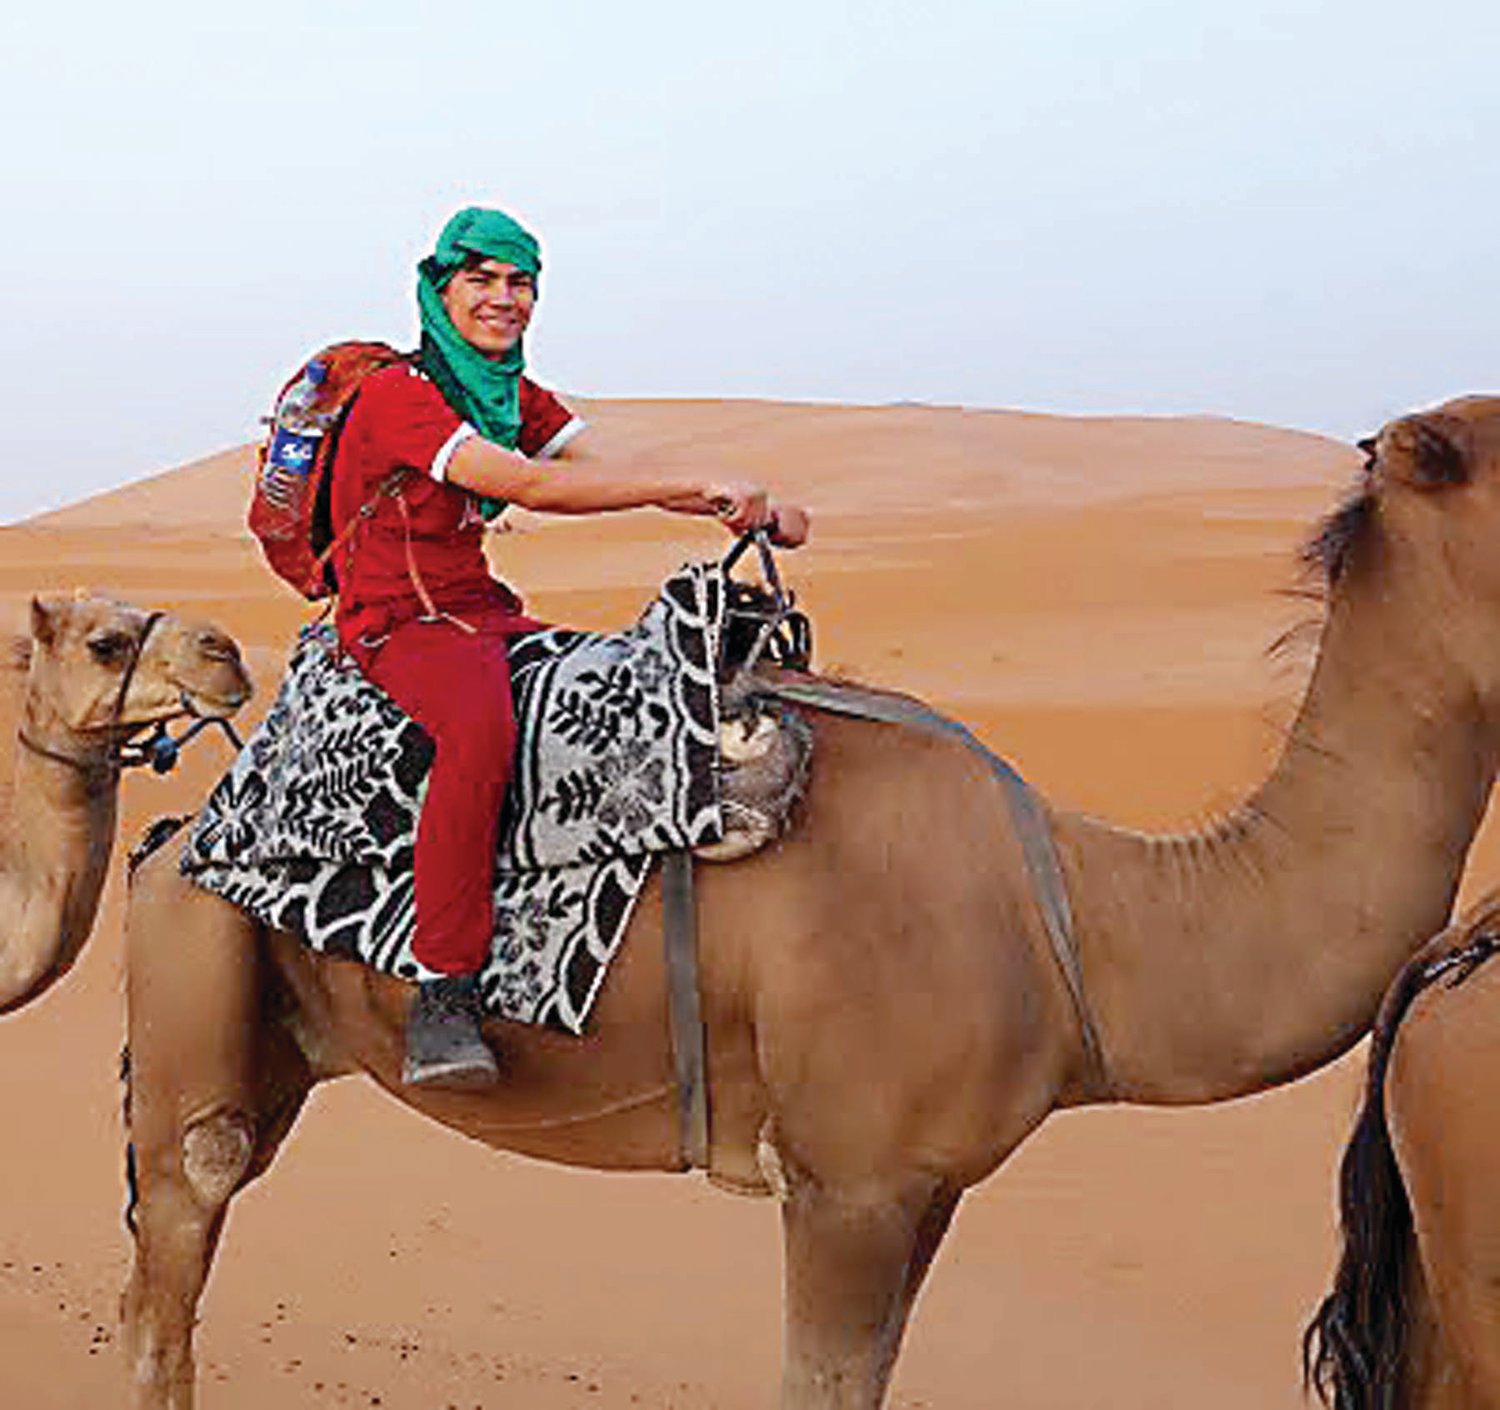 Pennridge high School junior Henry Leopold spent his summer studying the Arabic language and immersing himself in the culture of Morocco.